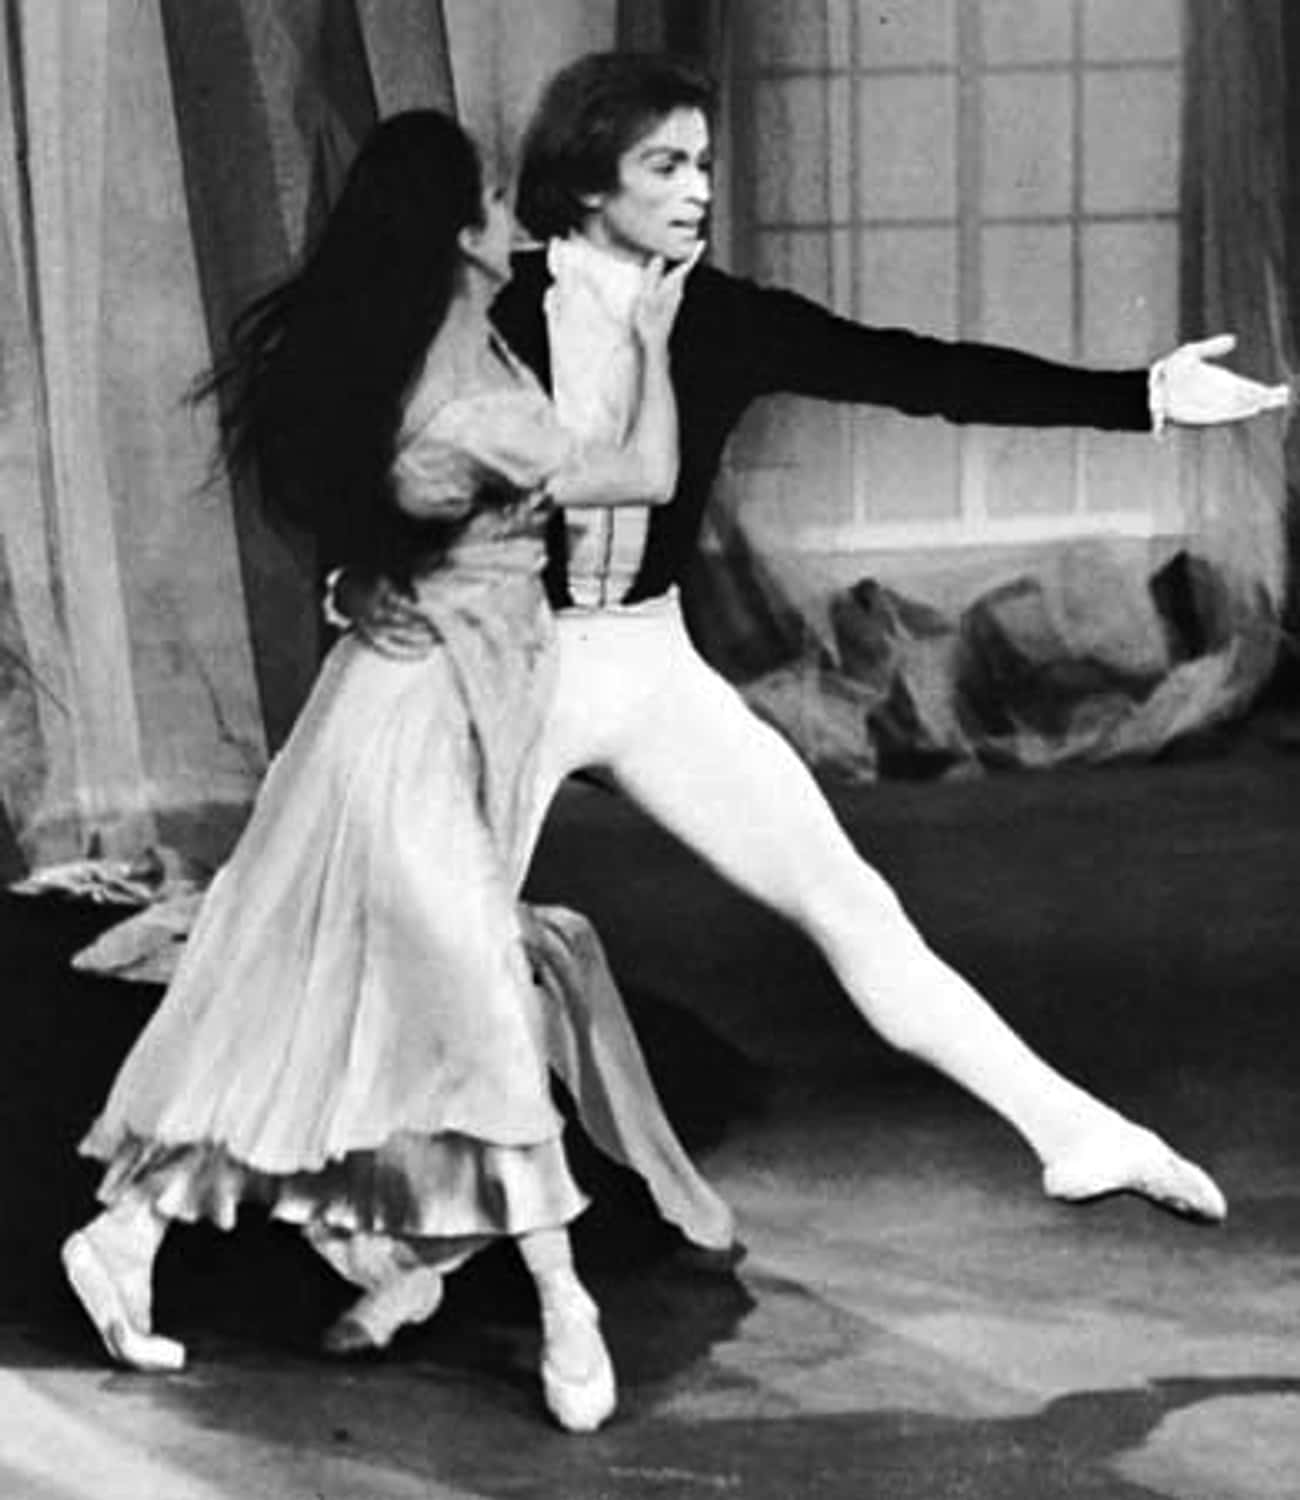 Young Patrick Swayze on Stage in Ballet Production